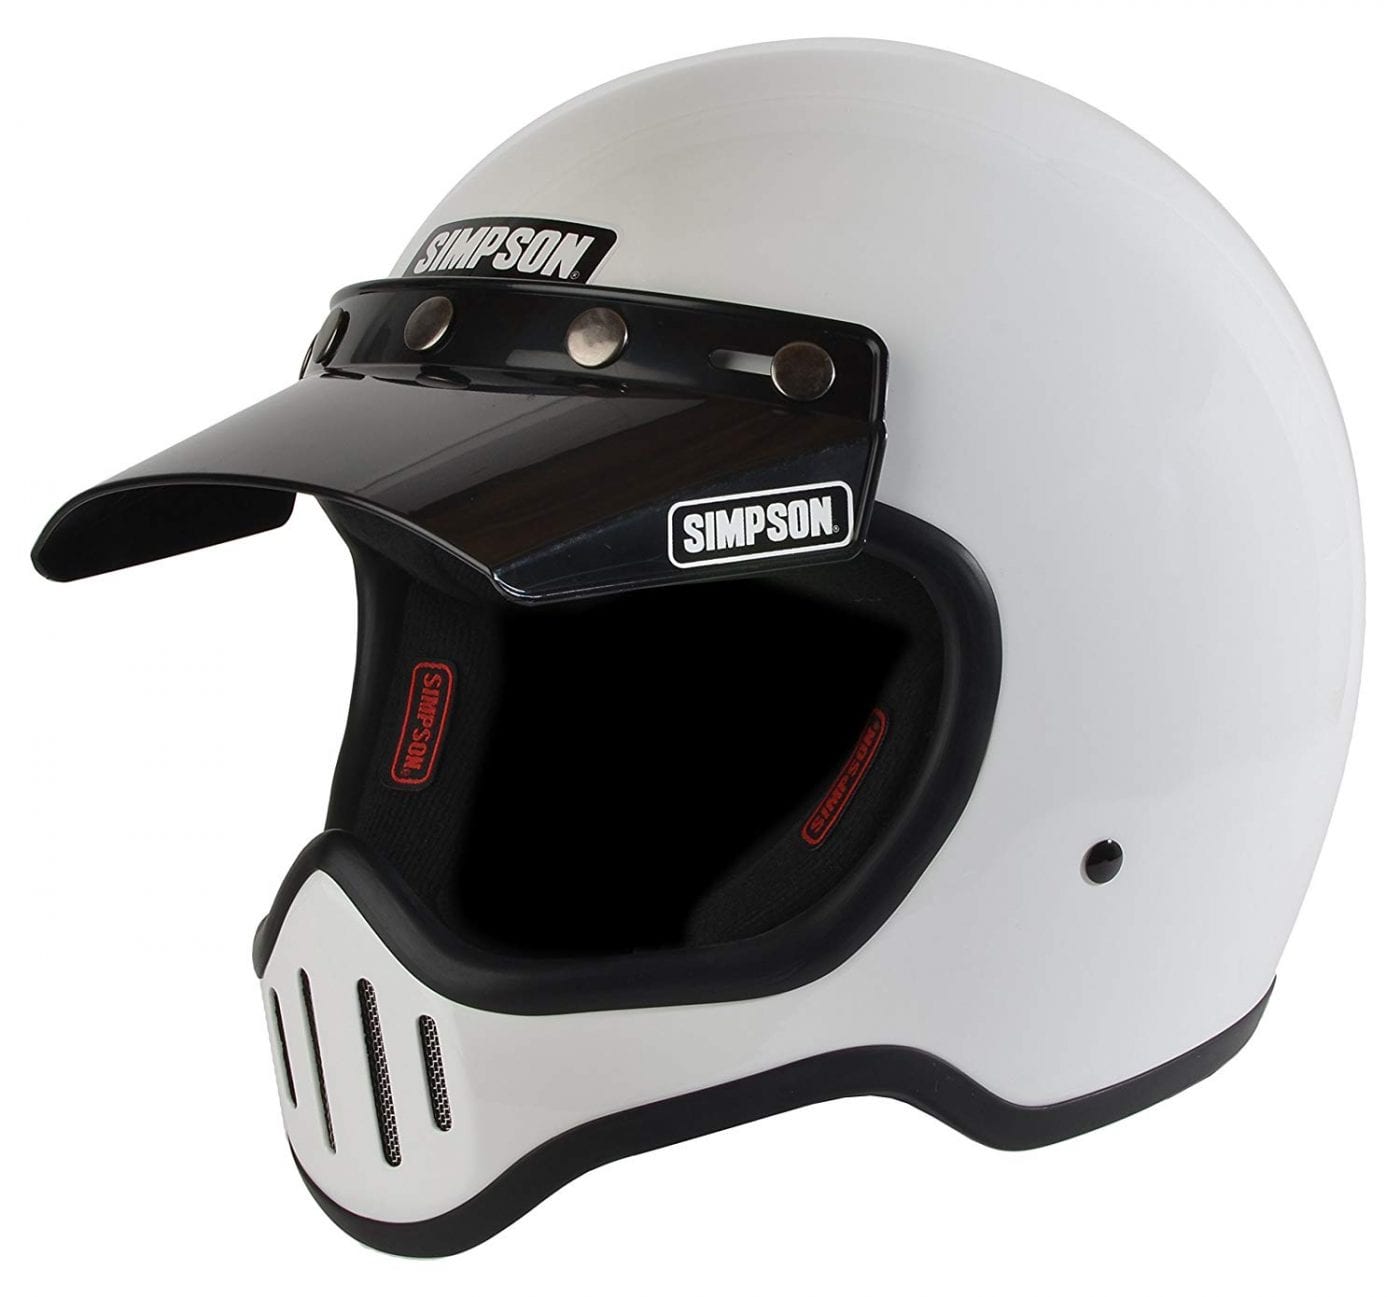 Simpson M50 DOT Helmet review Retro style helmet that protects your head